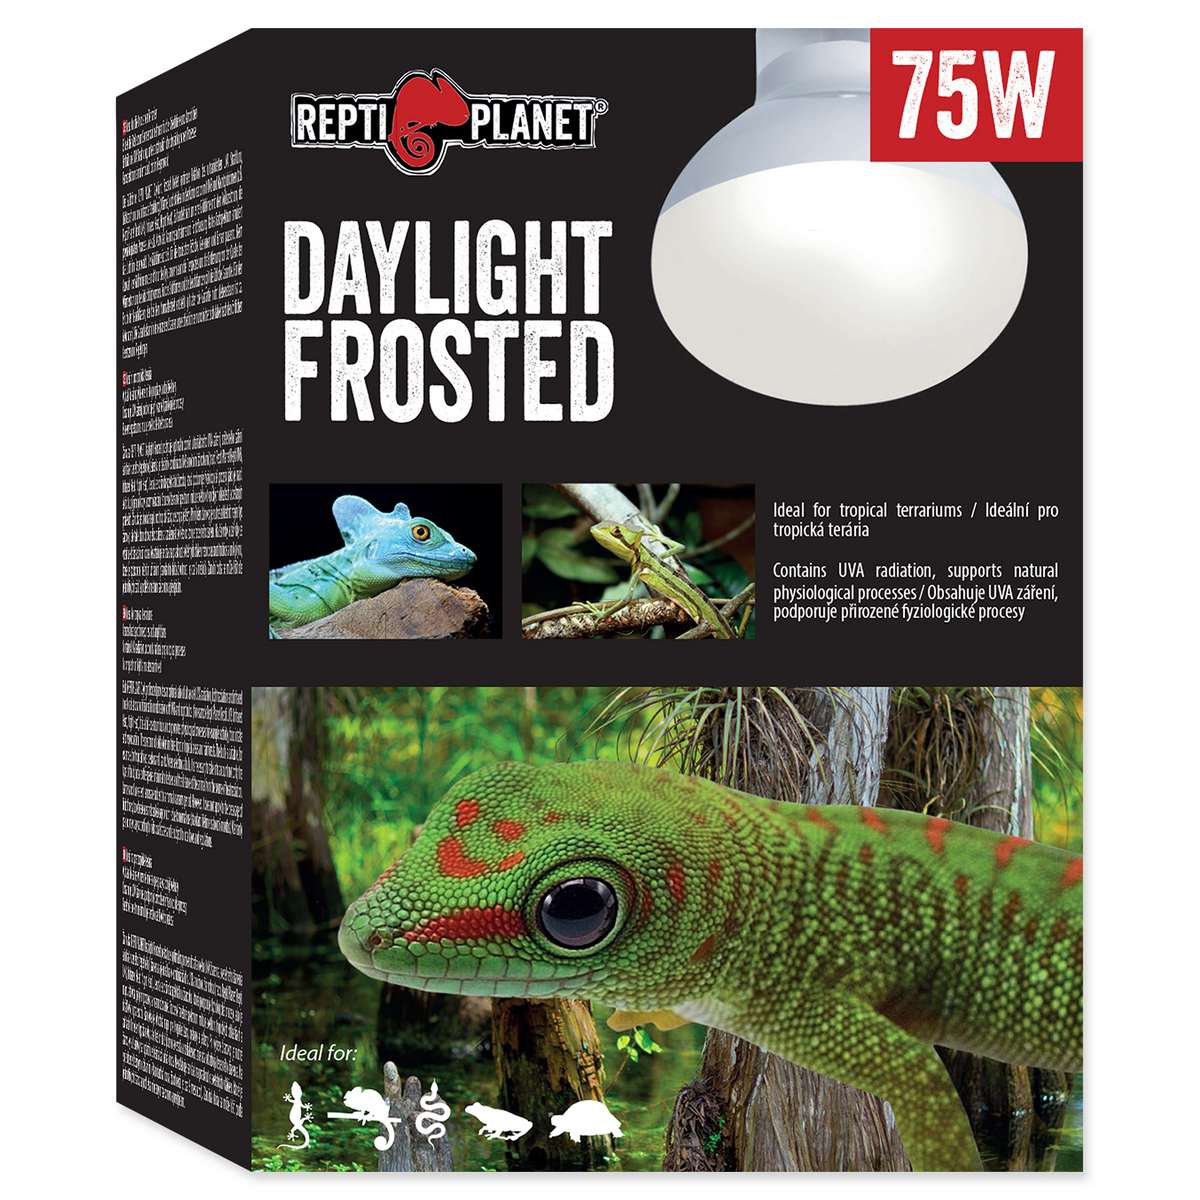 Repti Planet Daylight Frosted 75 W 007-41023